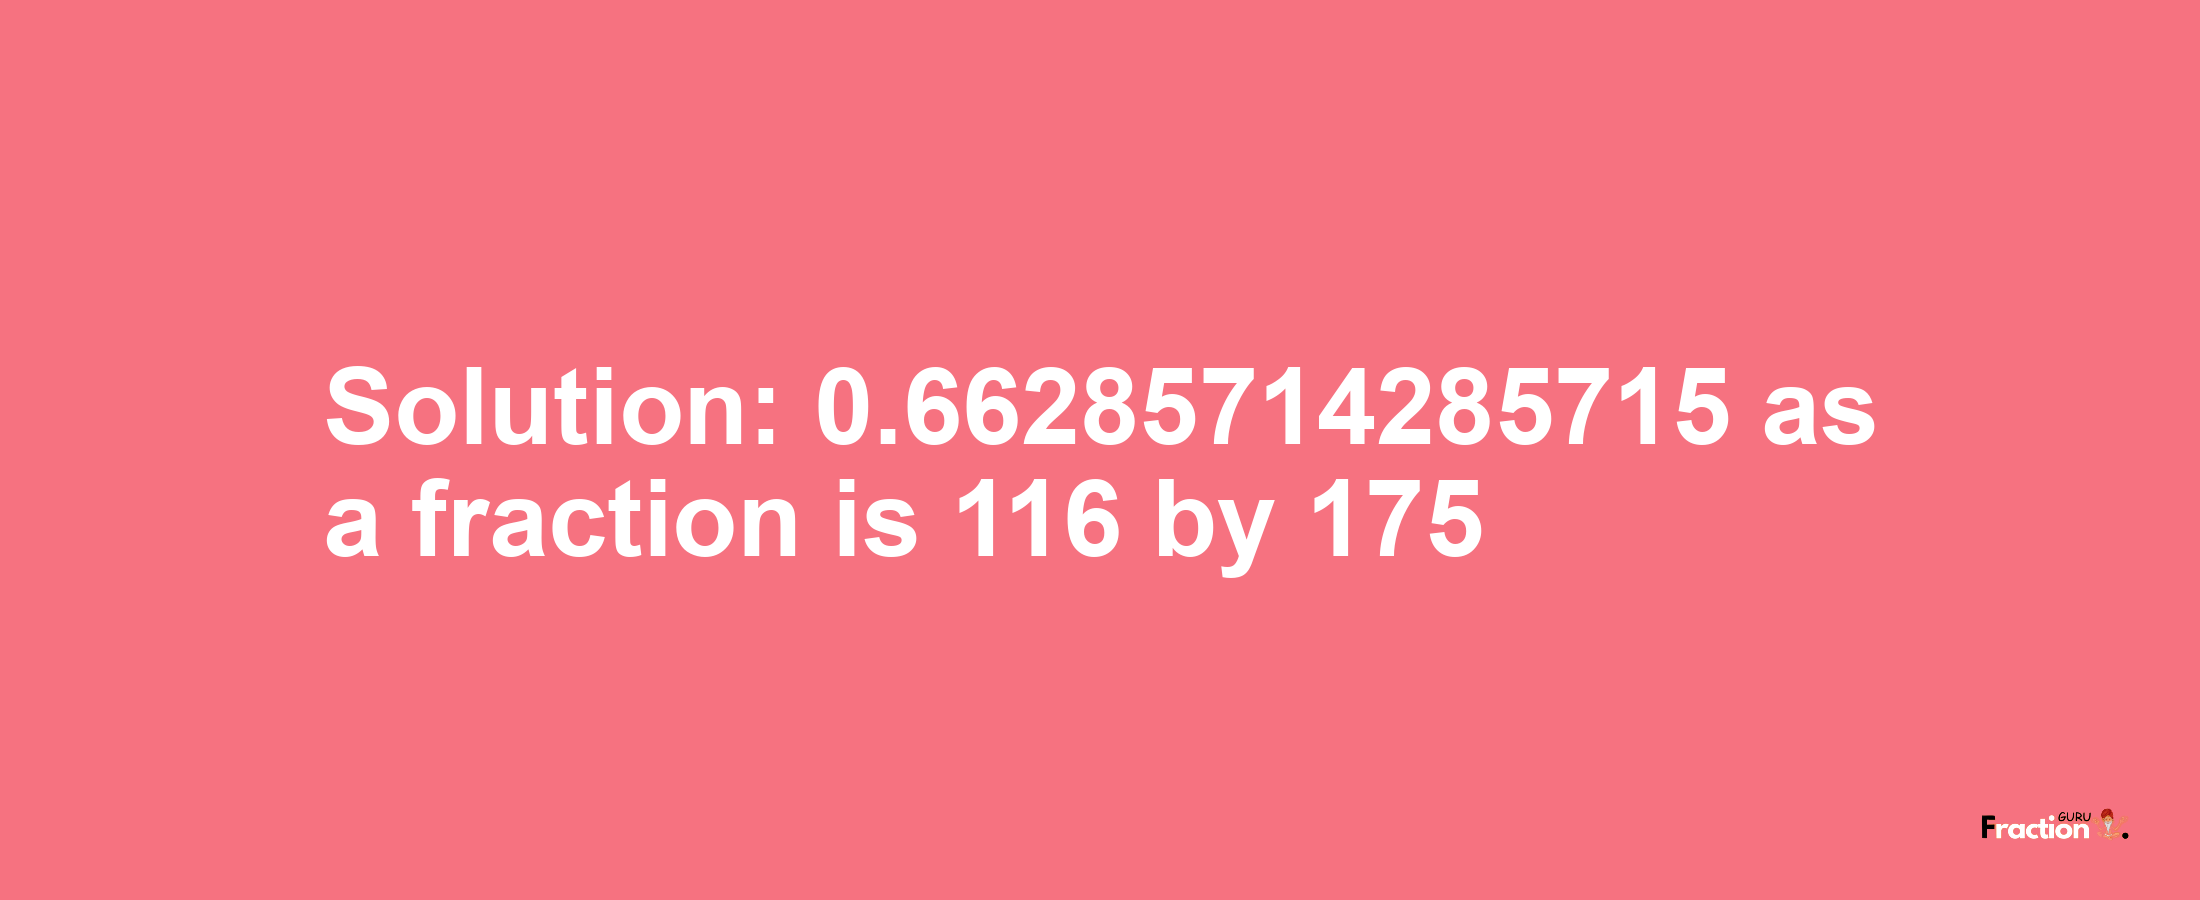 Solution:0.66285714285715 as a fraction is 116/175